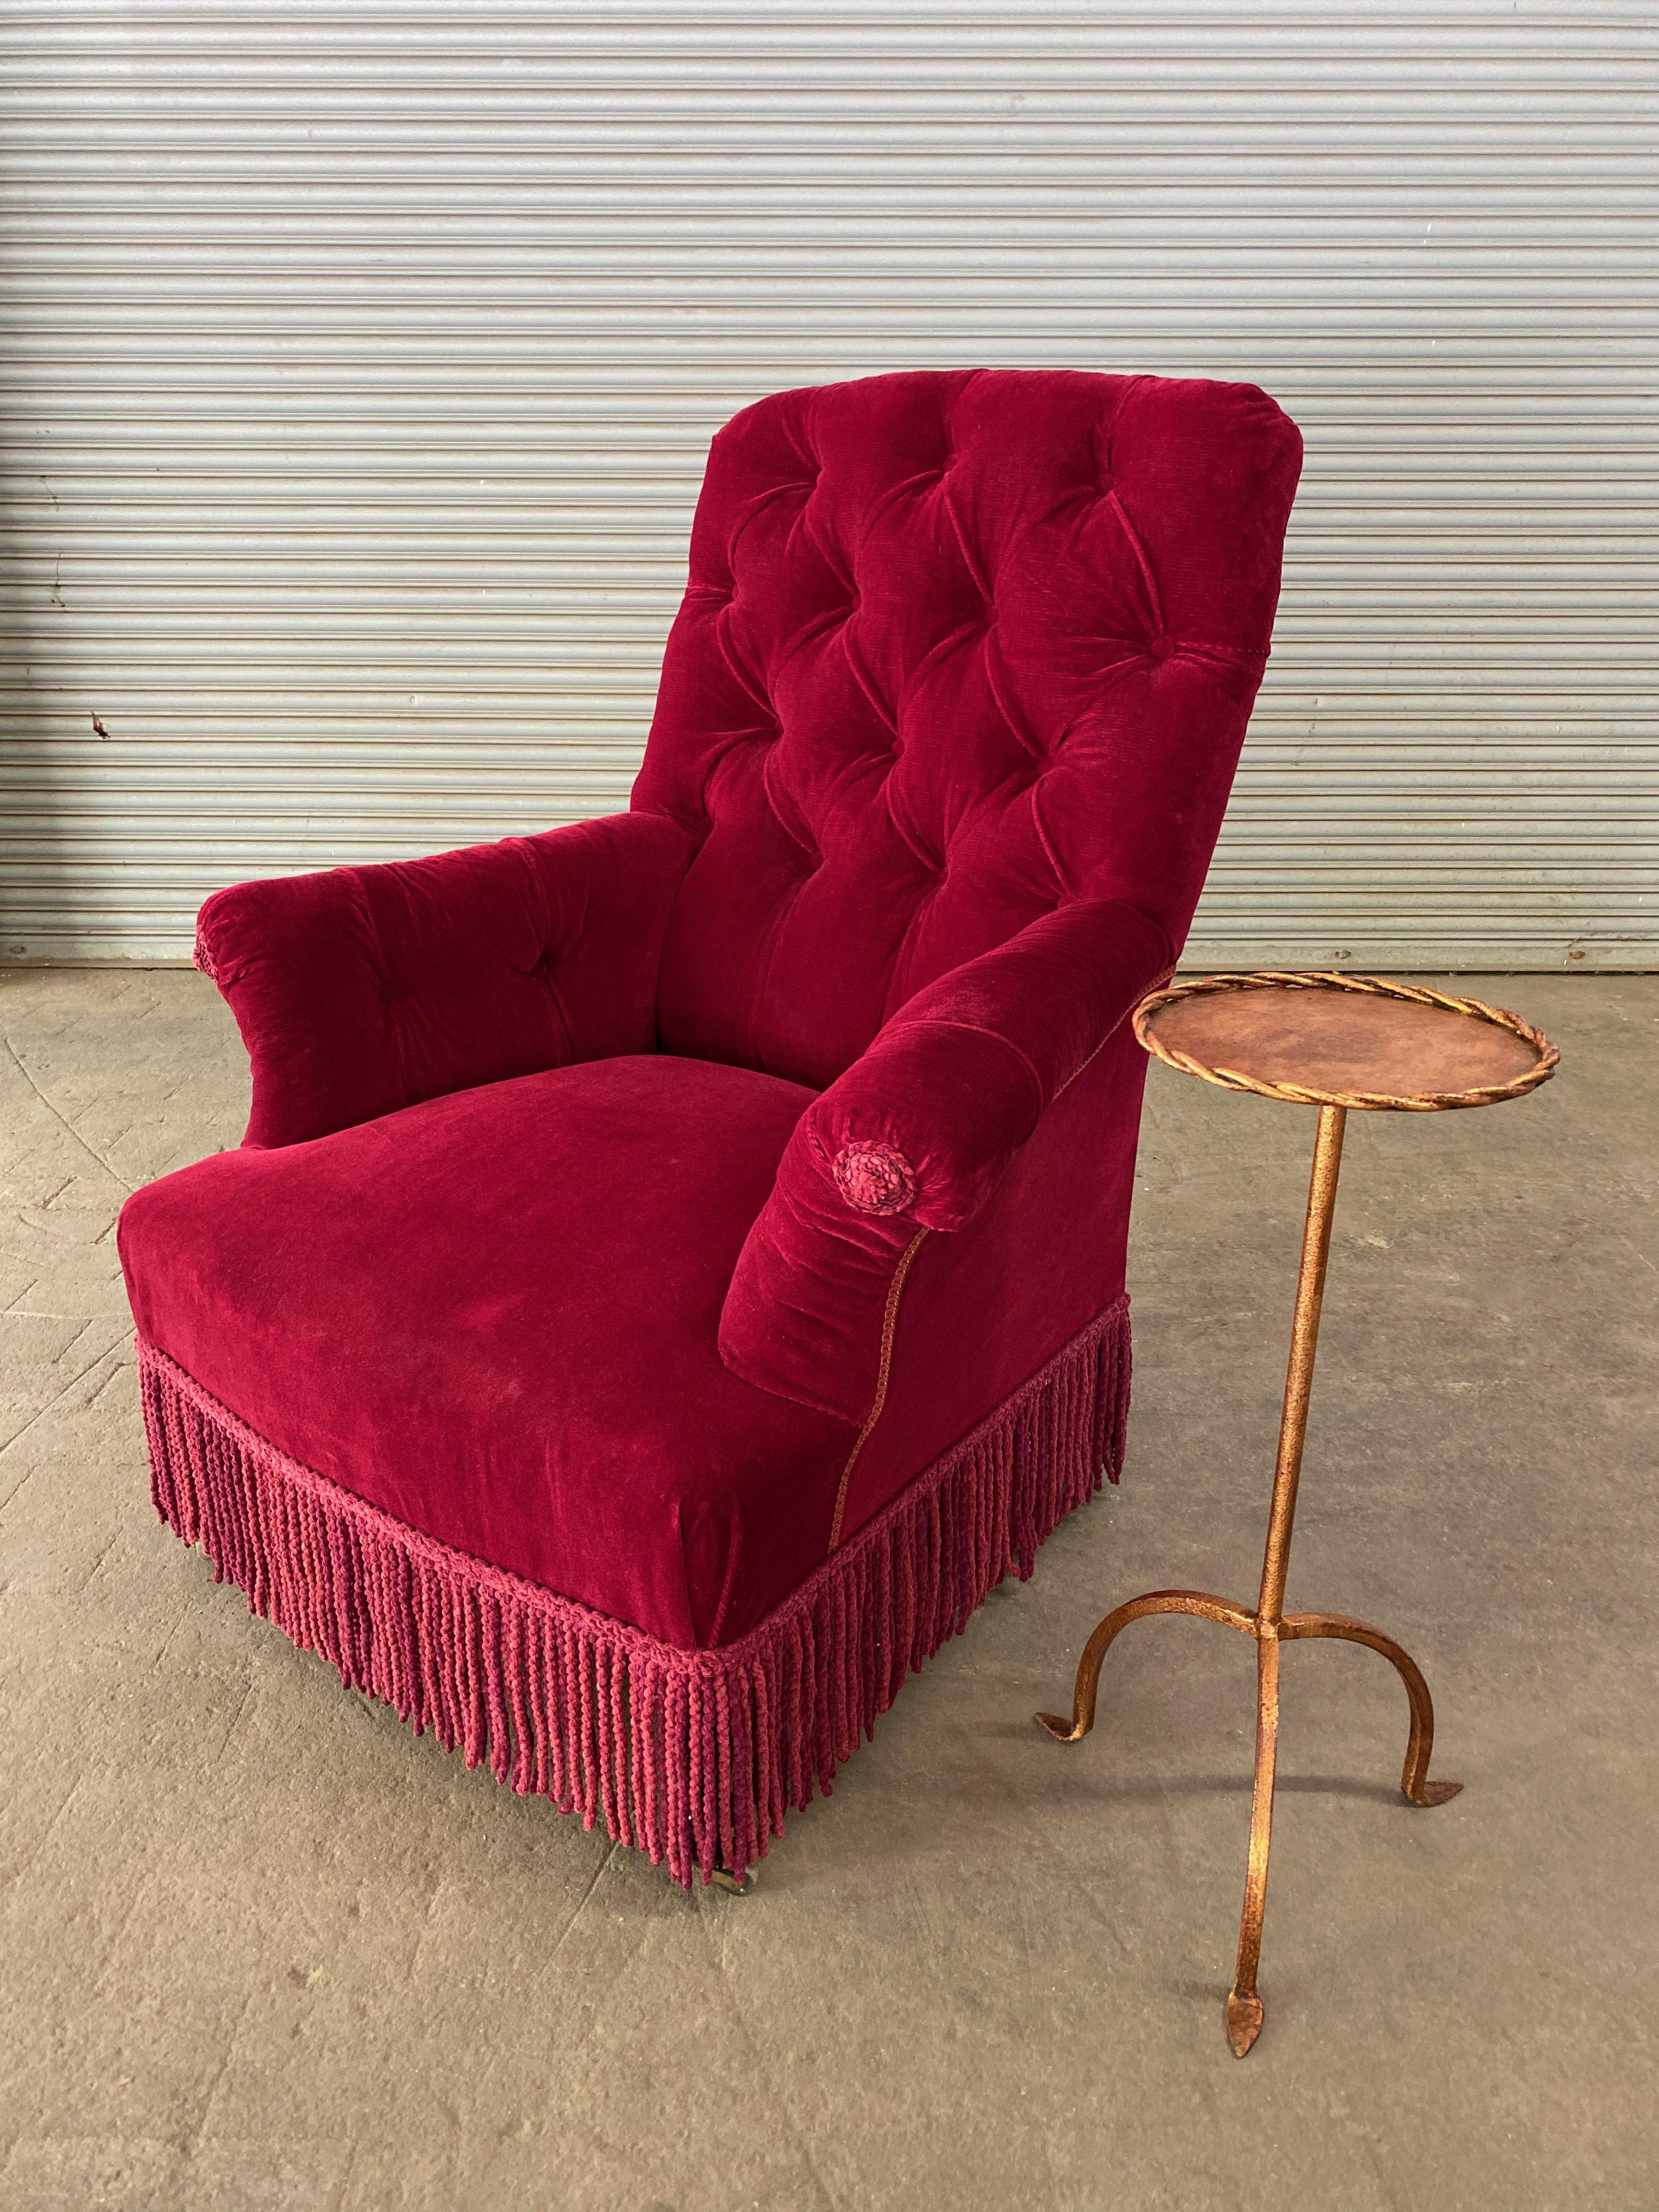 A pair of large French 19th century tufted armchairs upholstered in red velvet with matching bullion fringe. The armchairs are in very good vintage condition, and while the upholstery is not new, the fabric is clean and can be used. Sold as